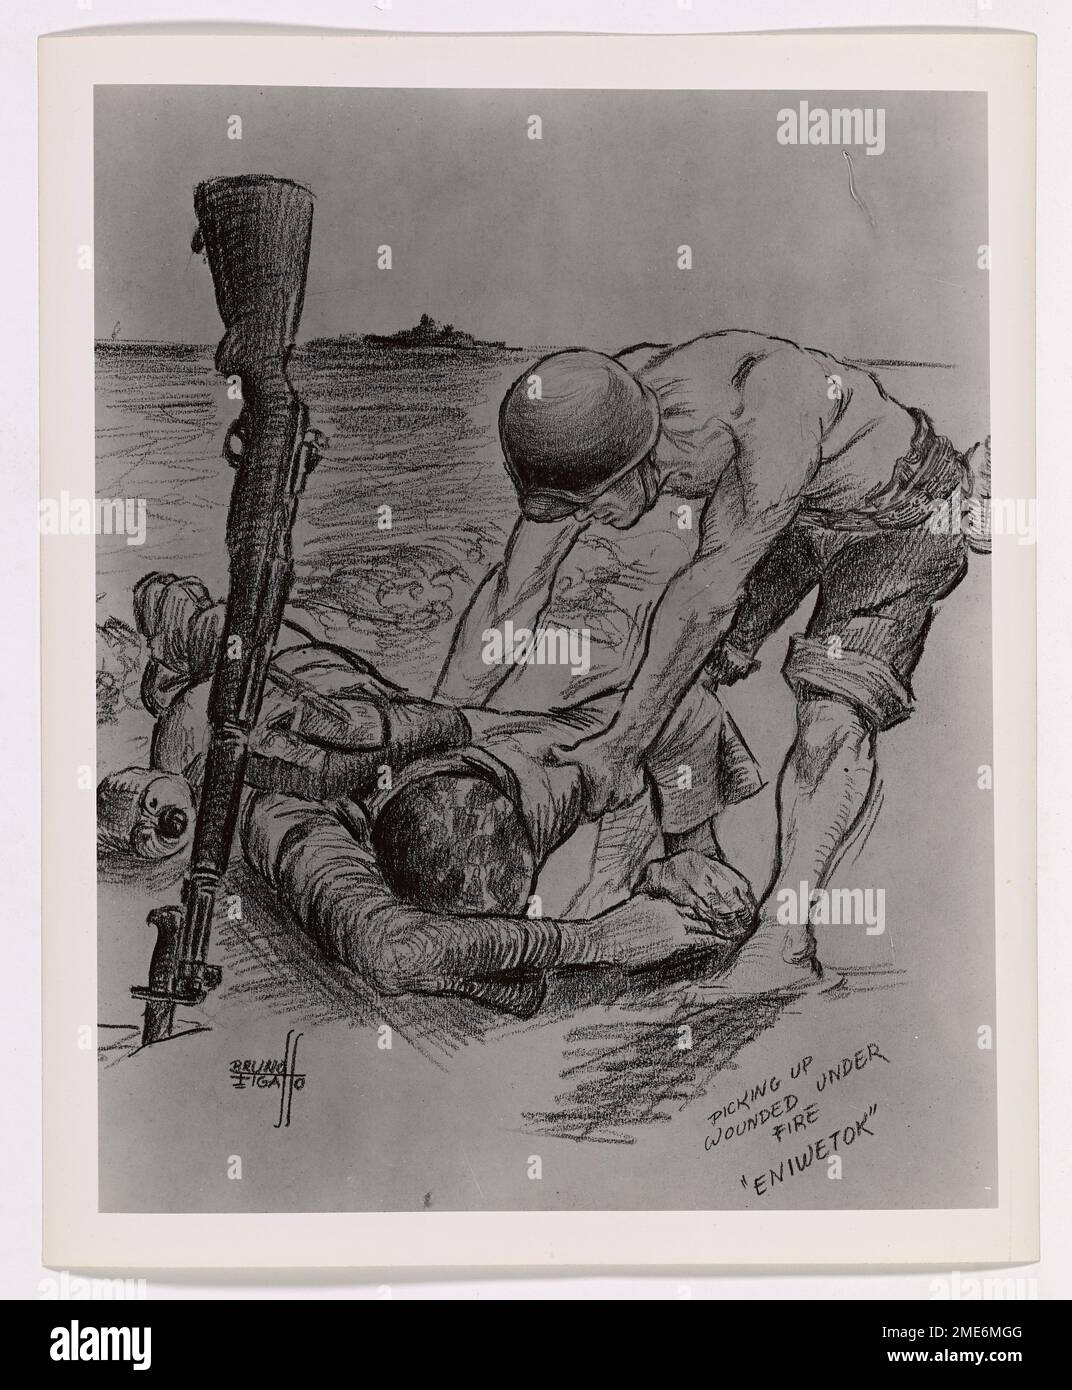 Picking up the Wounded Under Fire. This image depicts artwork of a Coast Guardsman aiding a wounded comrade during the invasion of Eniwetok Atoll, drawn by Coast Guard Combat Artist Bruno Figallo. See also 26-G-09-05-44(2) for caption. Stock Photo